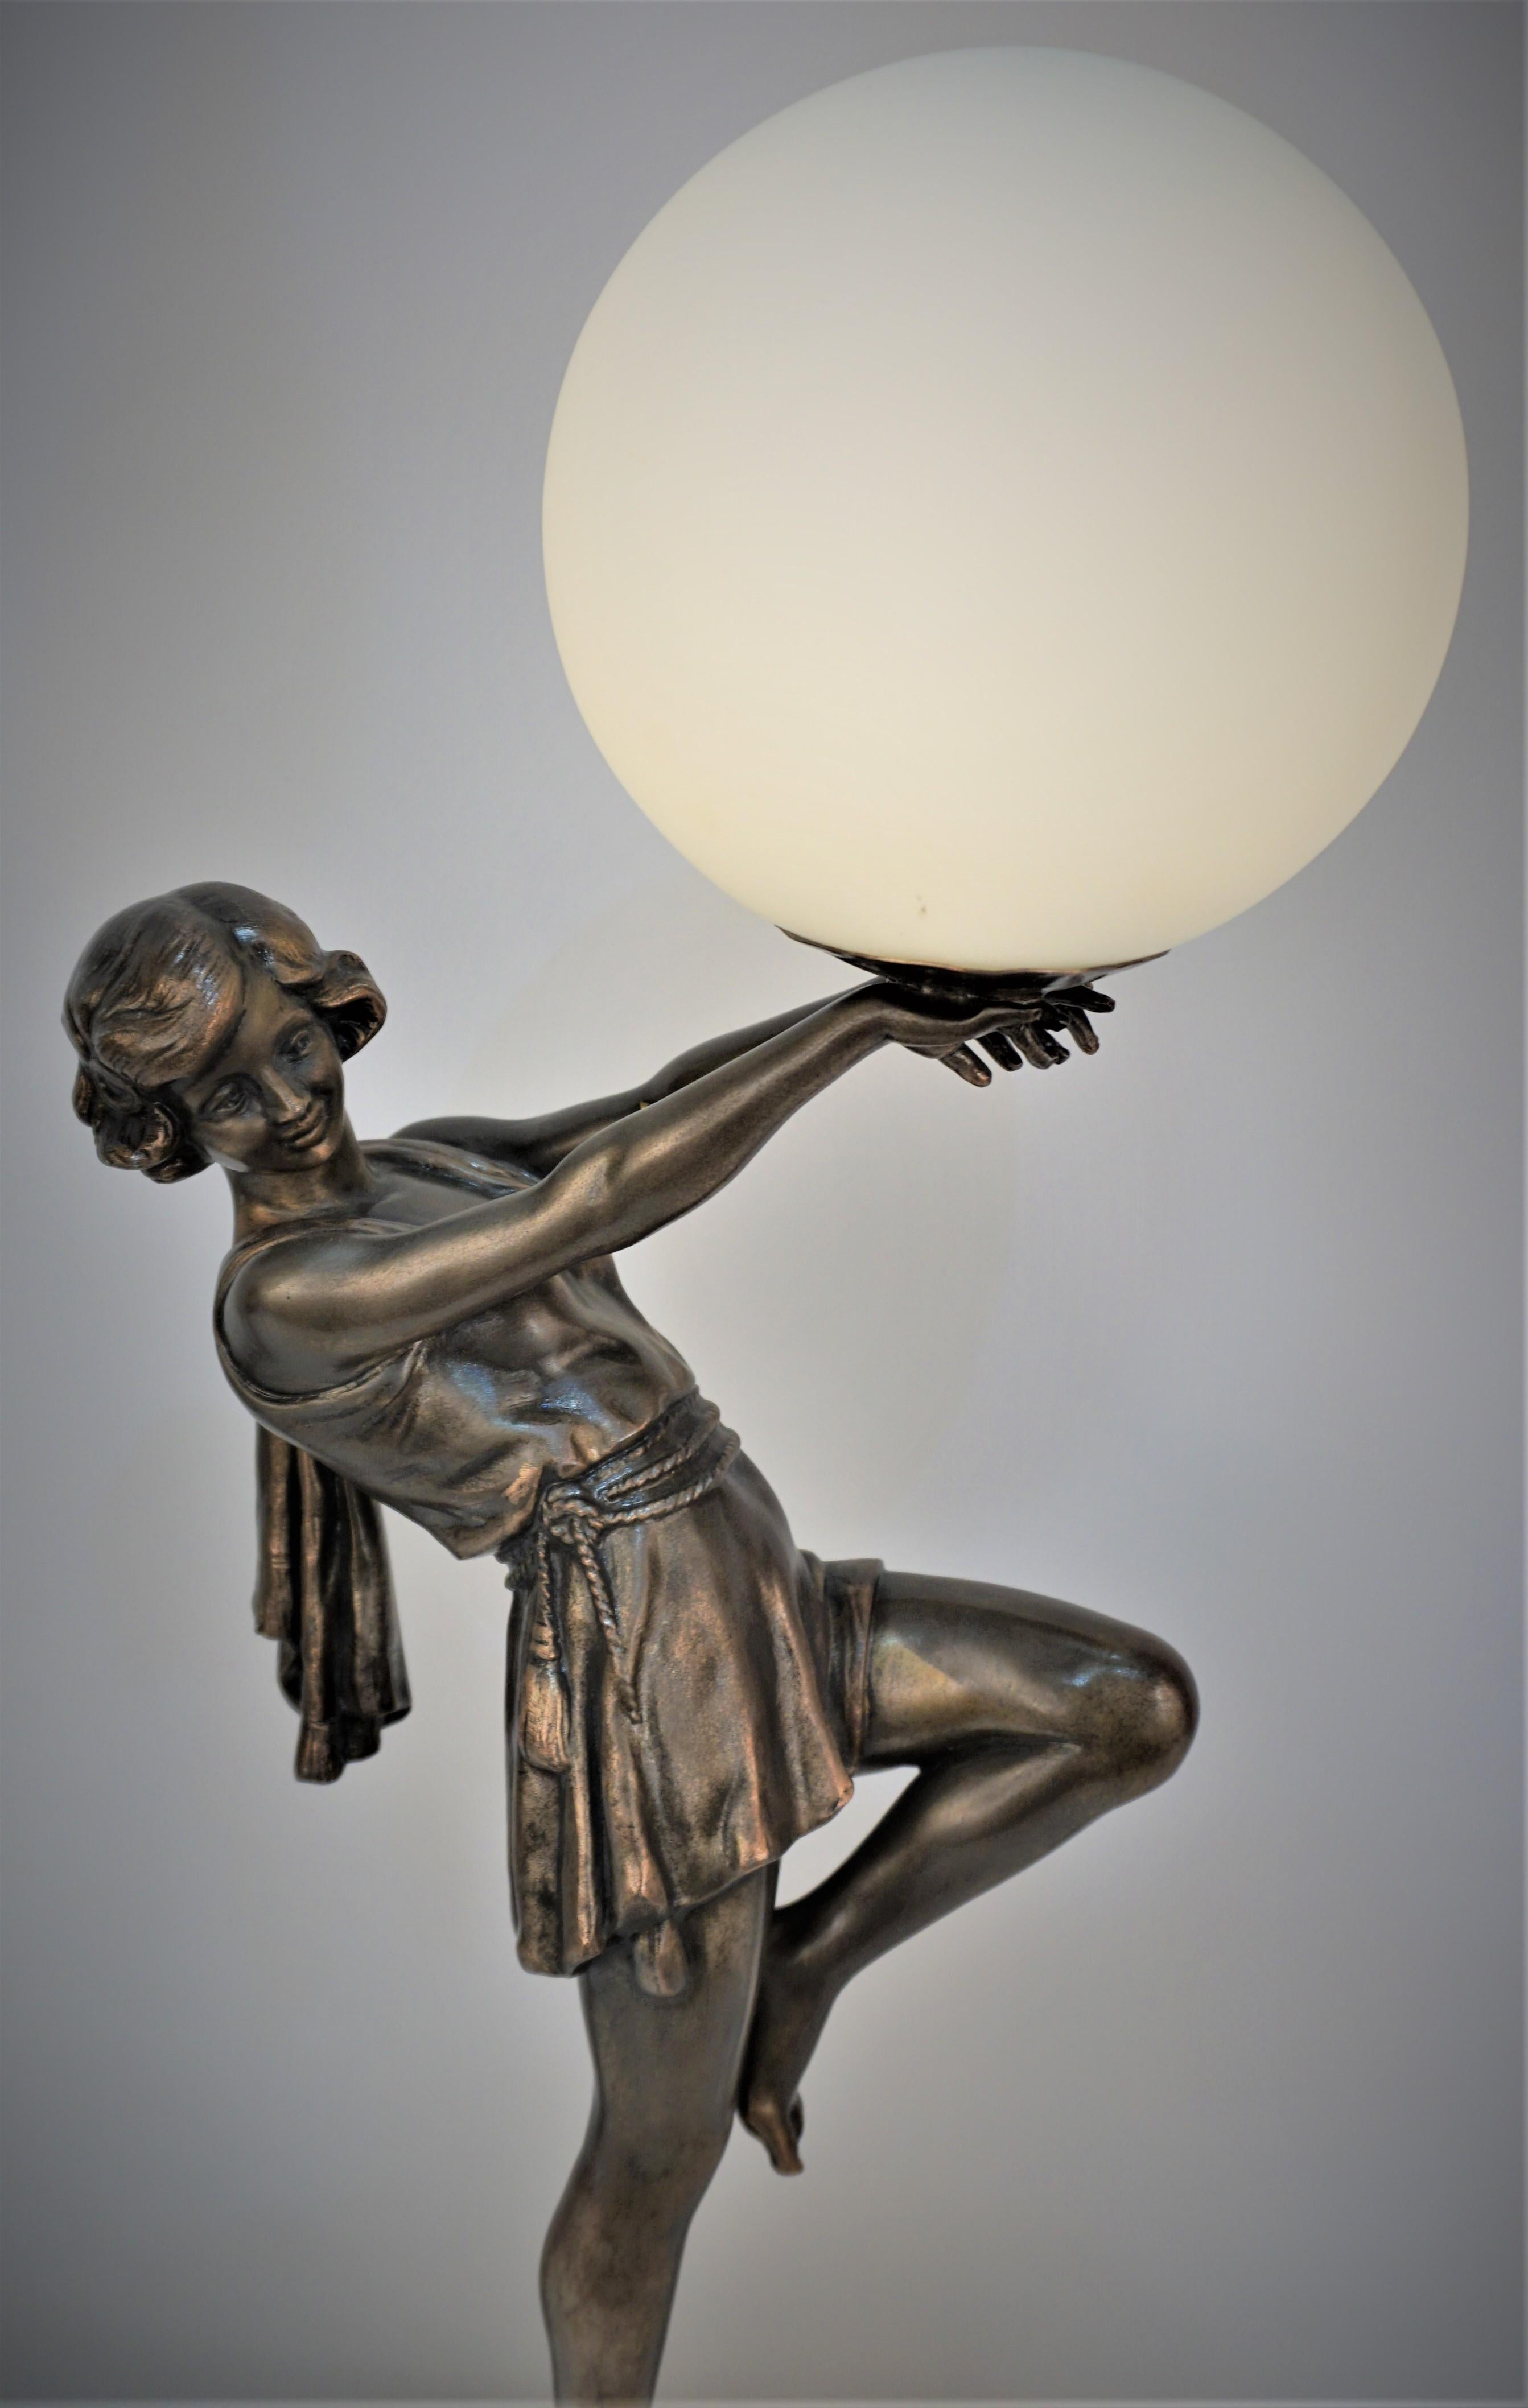 Art deco sculpture, standing on a marble base in dancing position holding a globe table lamp, by Fabrication Francaise Paris.